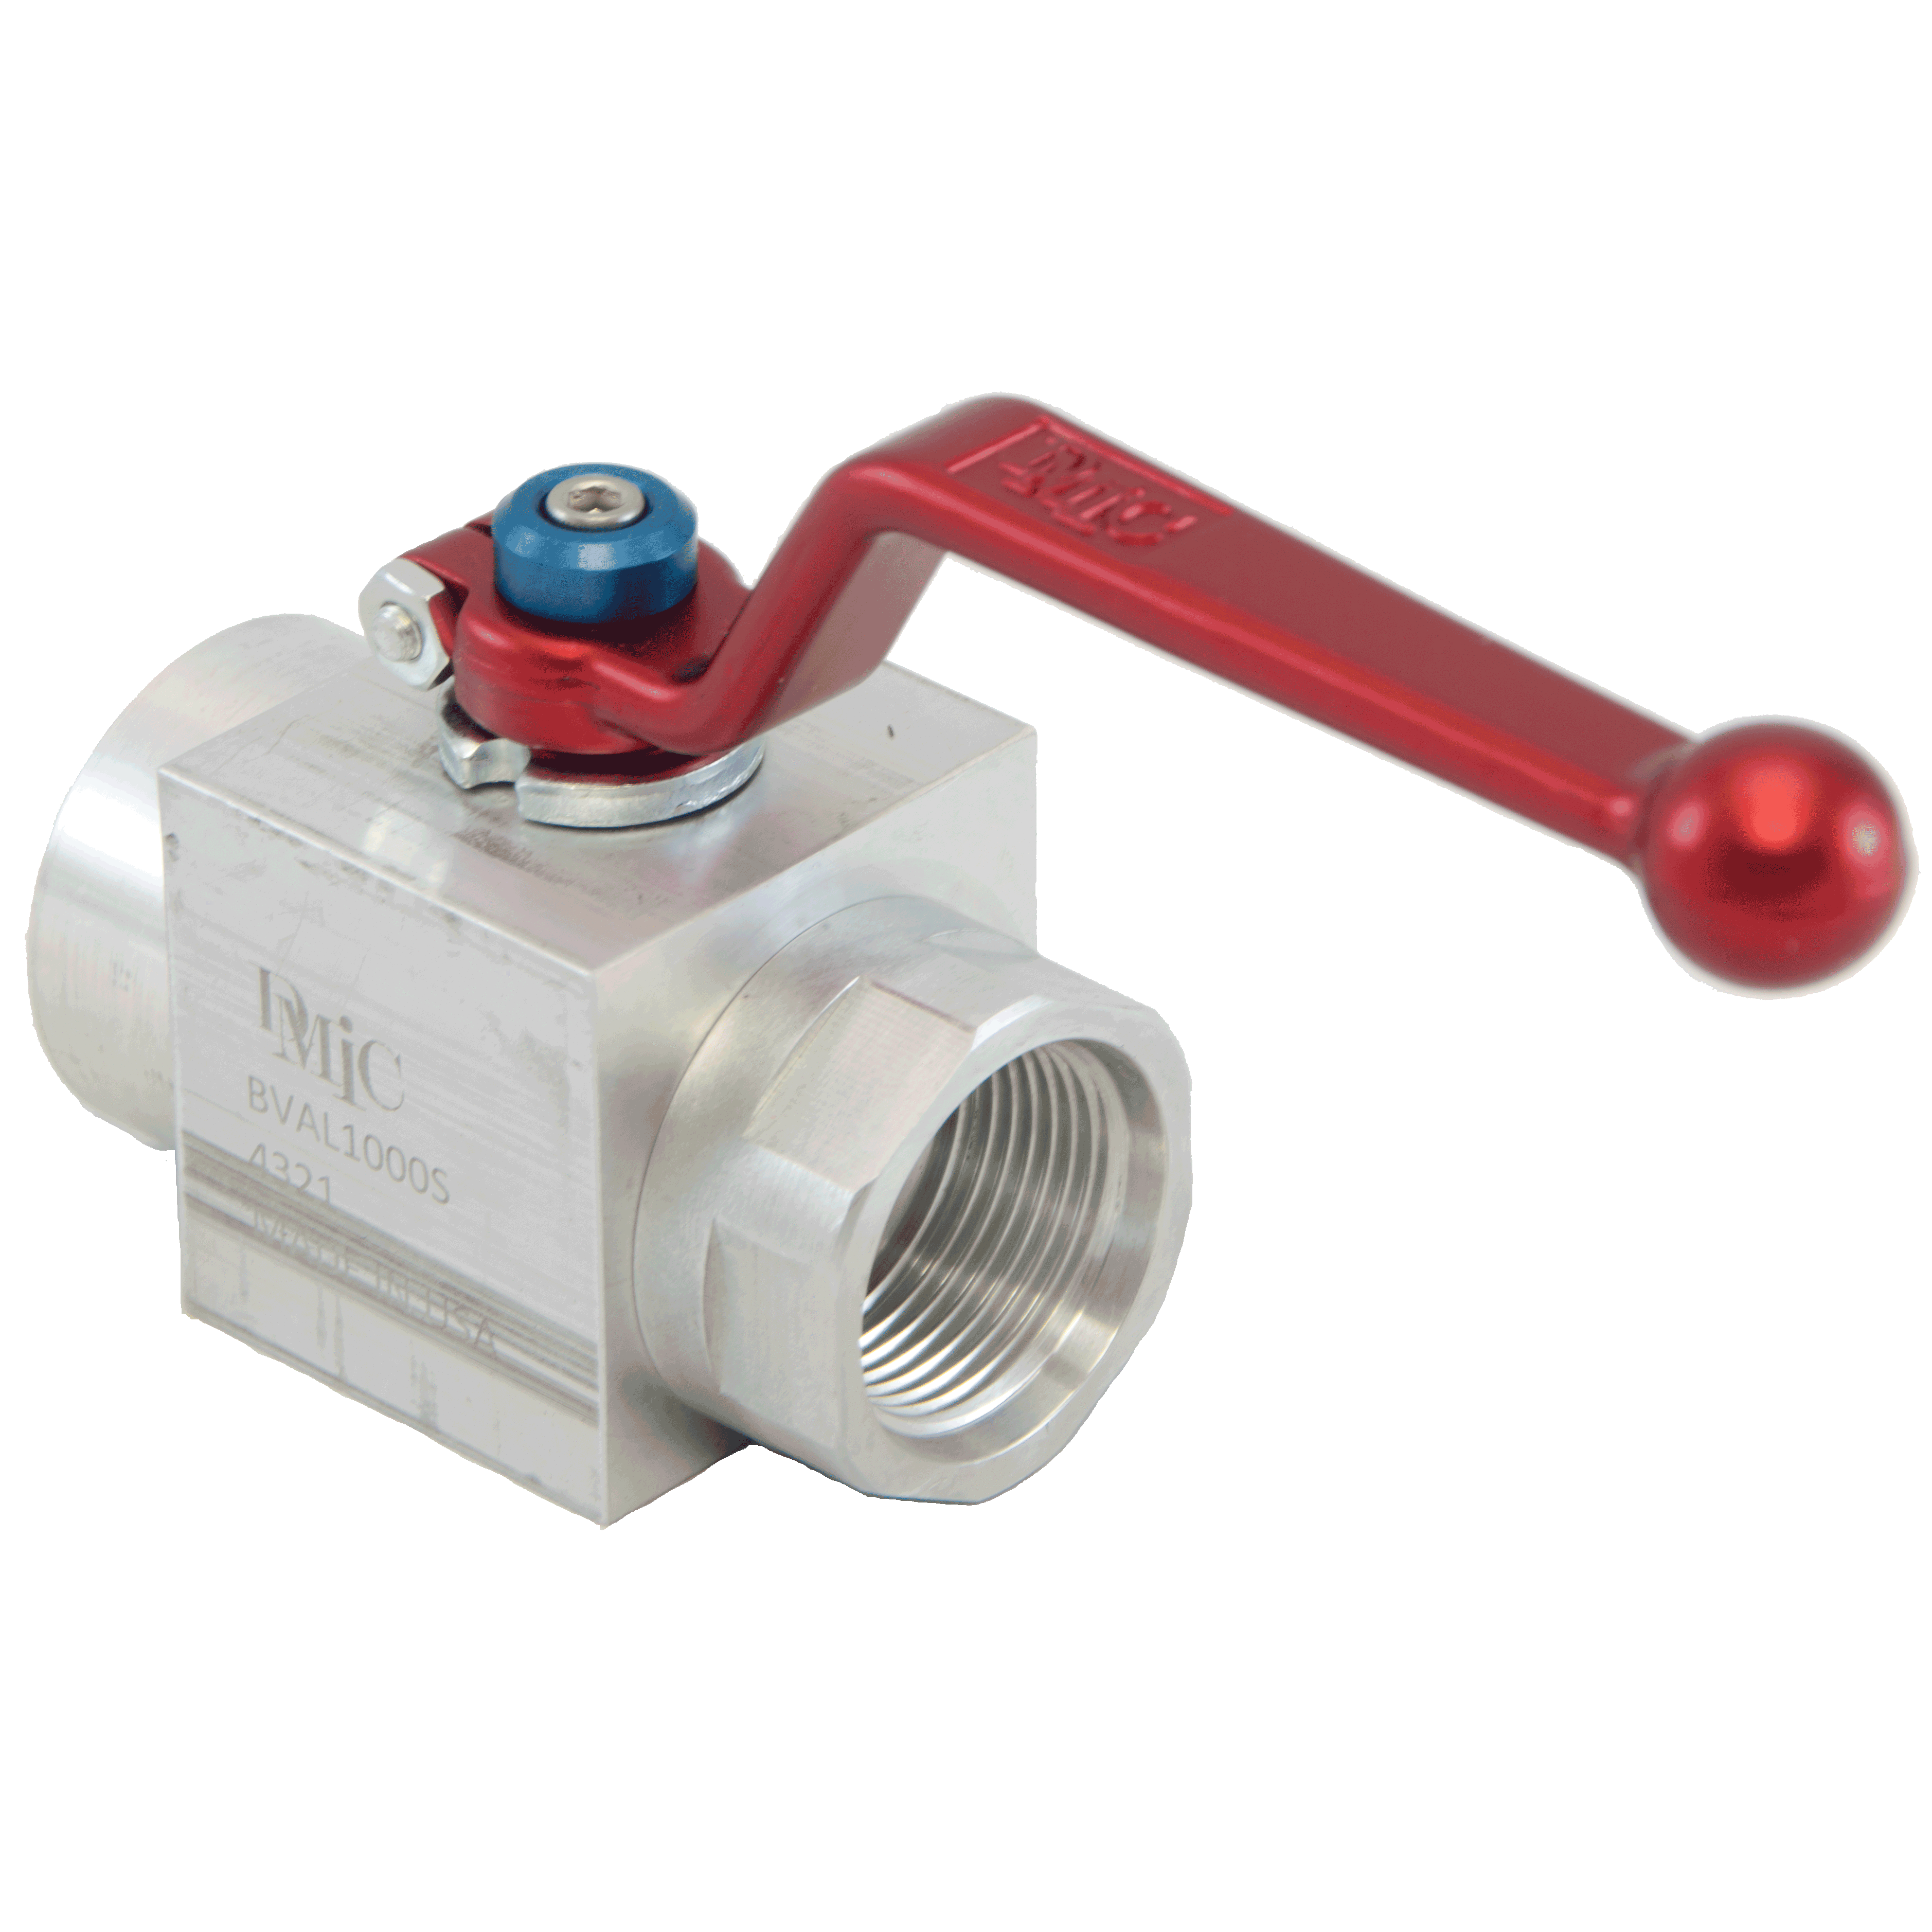 BVAL-0250N-4321 : DMIC Suction Ball Valve, 1/4 NPT, Aluminum, 600psi, Two-Way